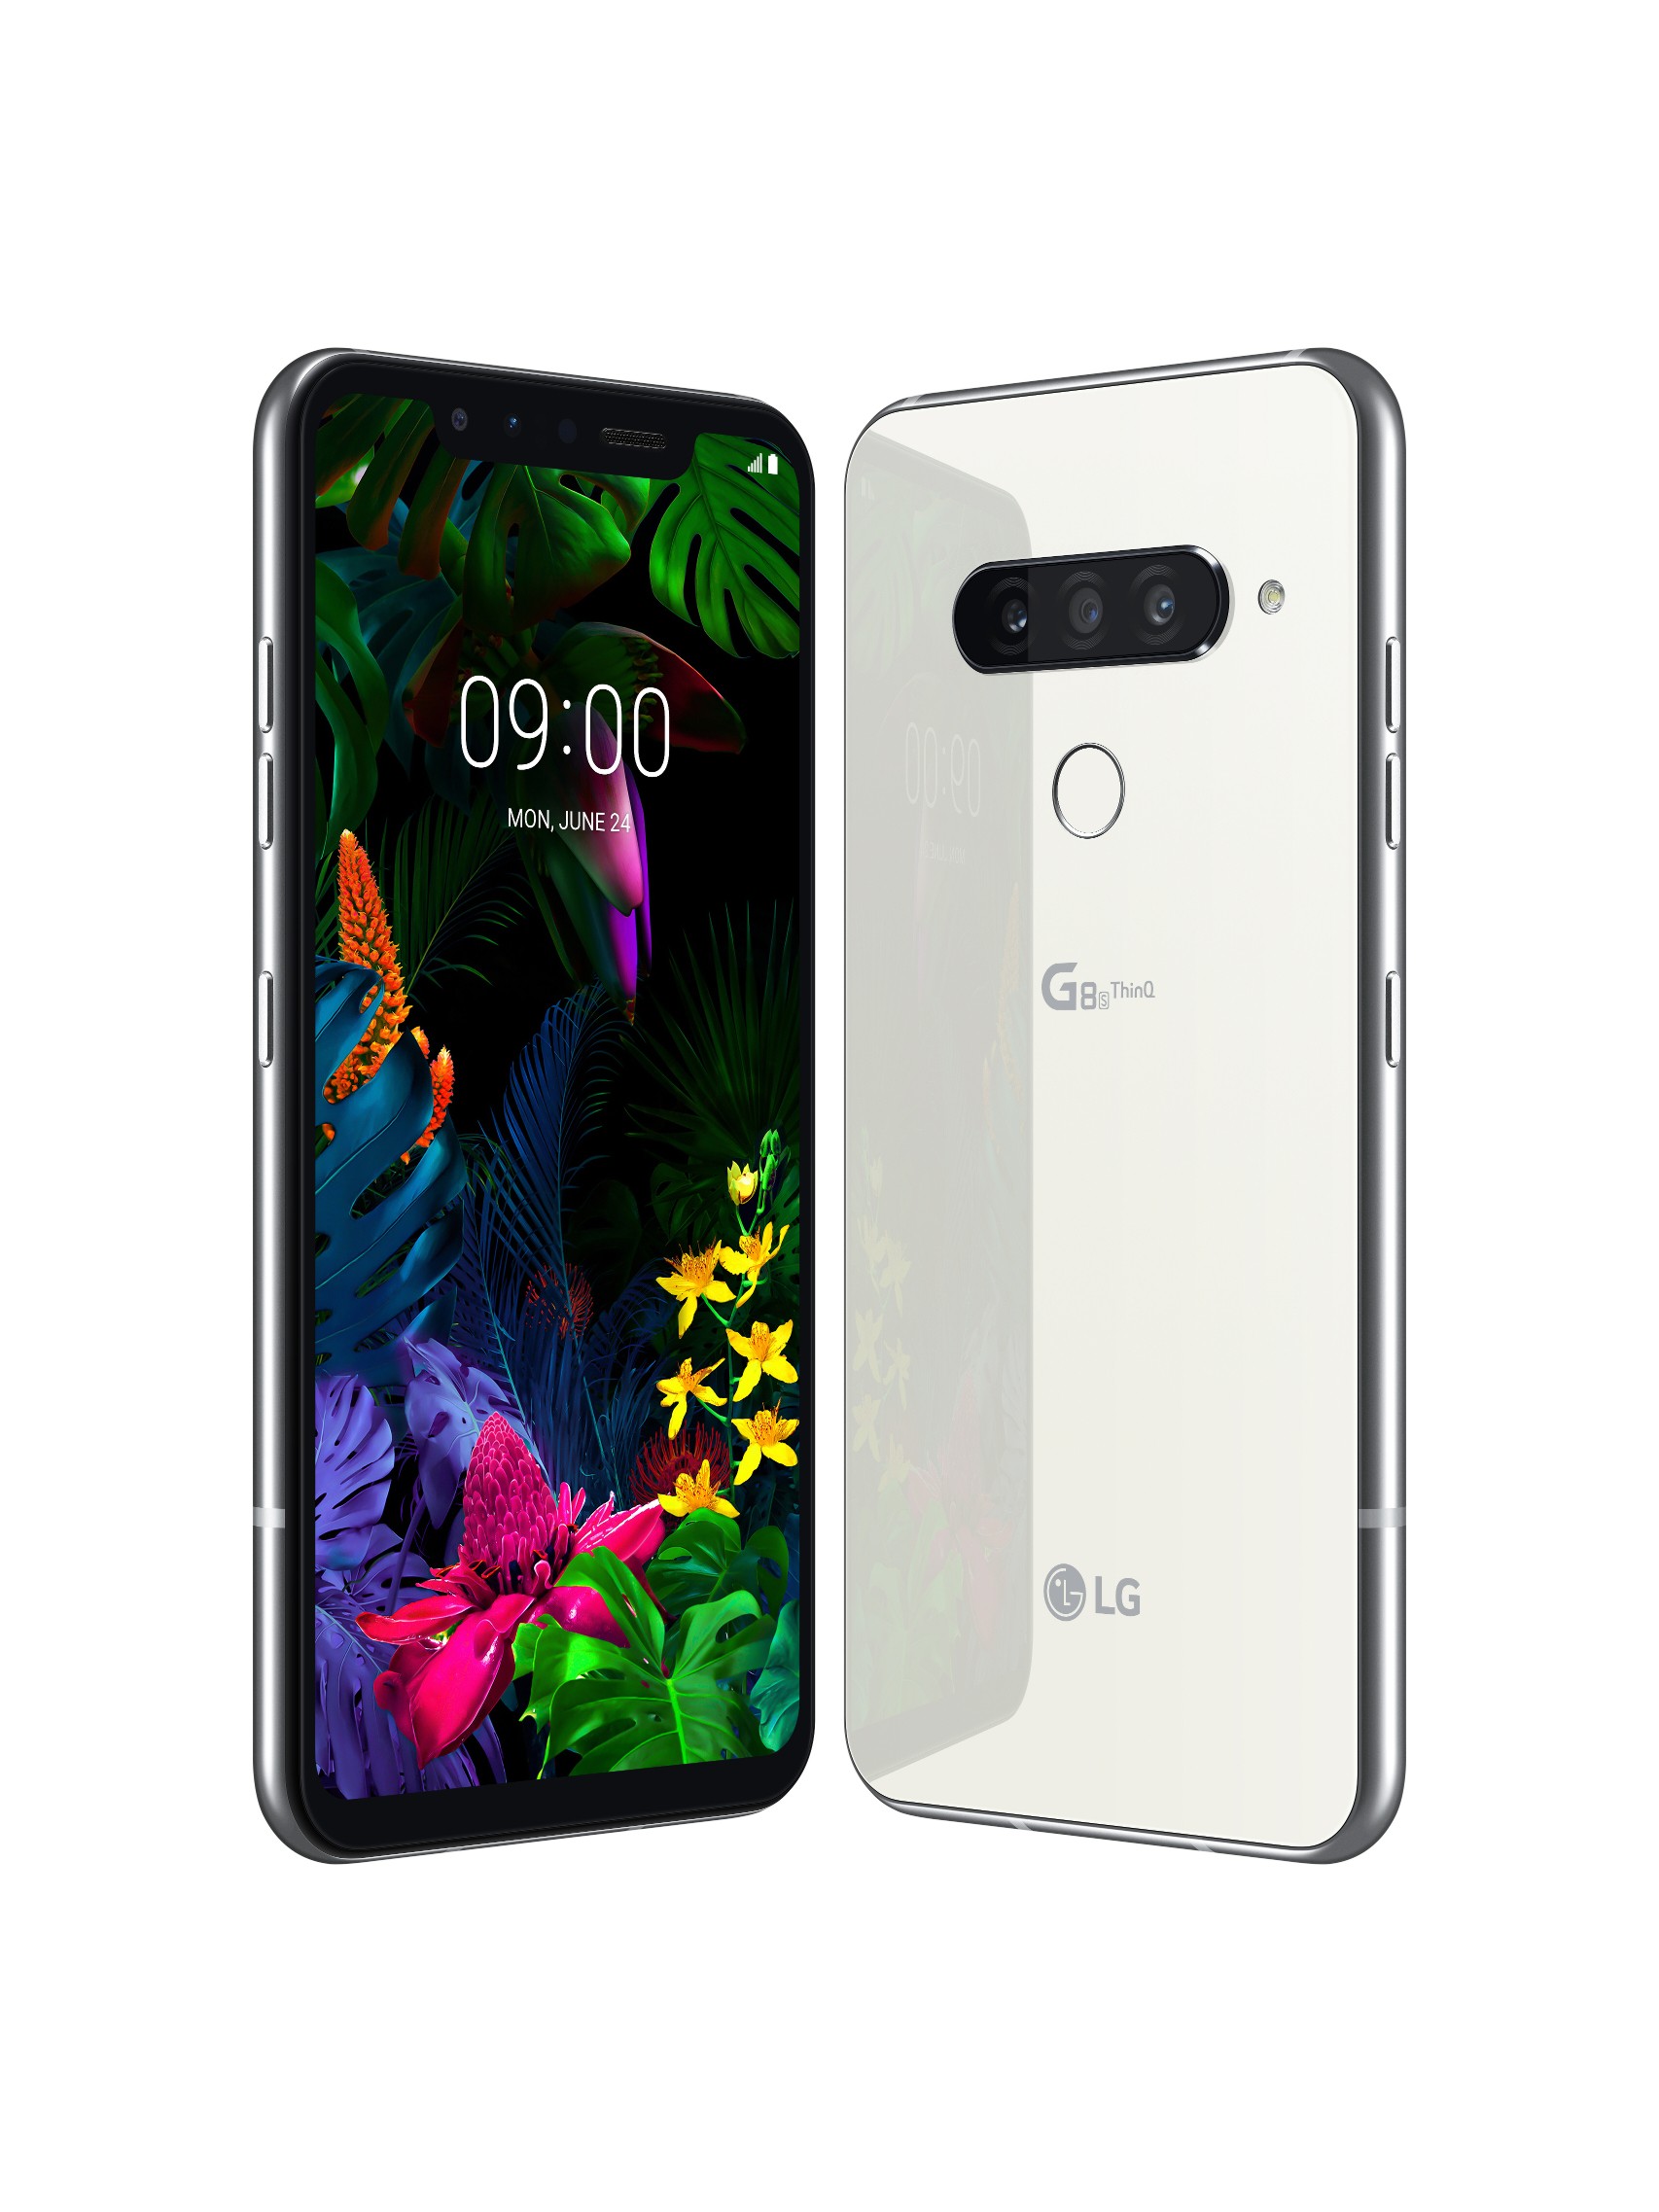 The front and rear view of the LG G8S ThinQ in Mirror White